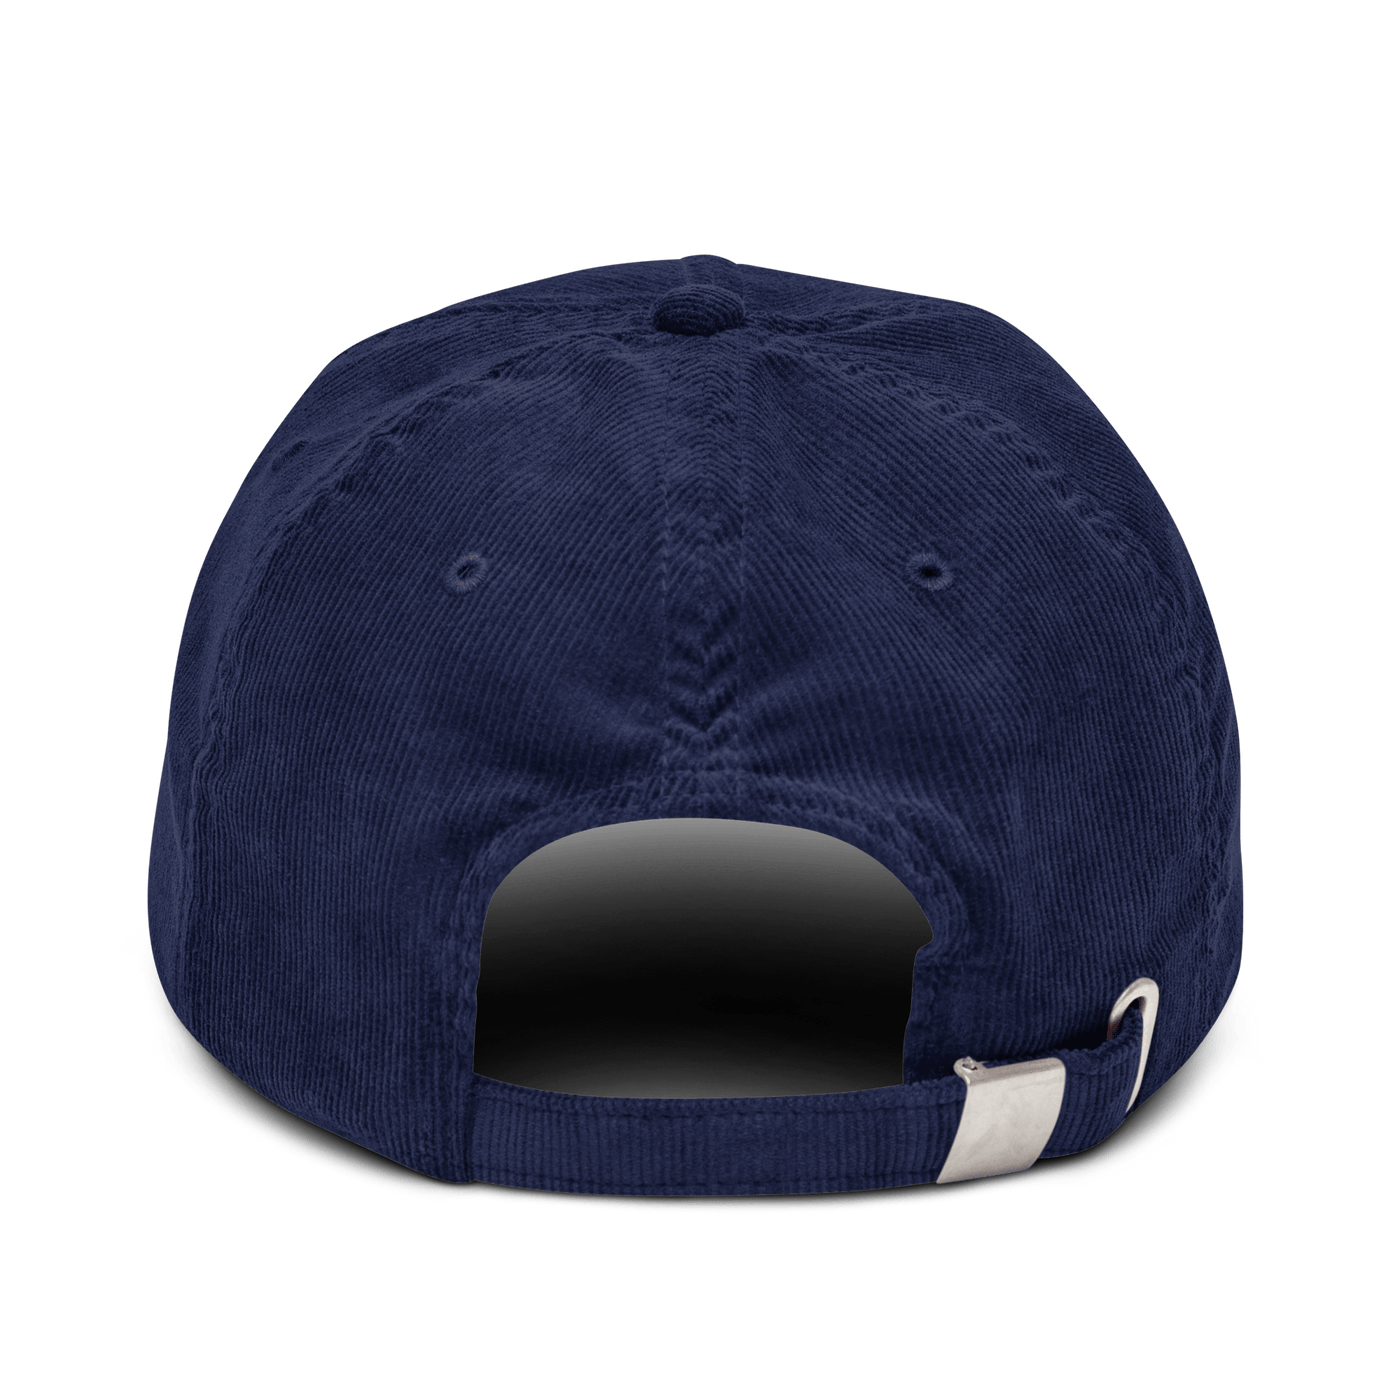 FAKE Corduroy hat - Oxford Navy - - Just Another Cap Store